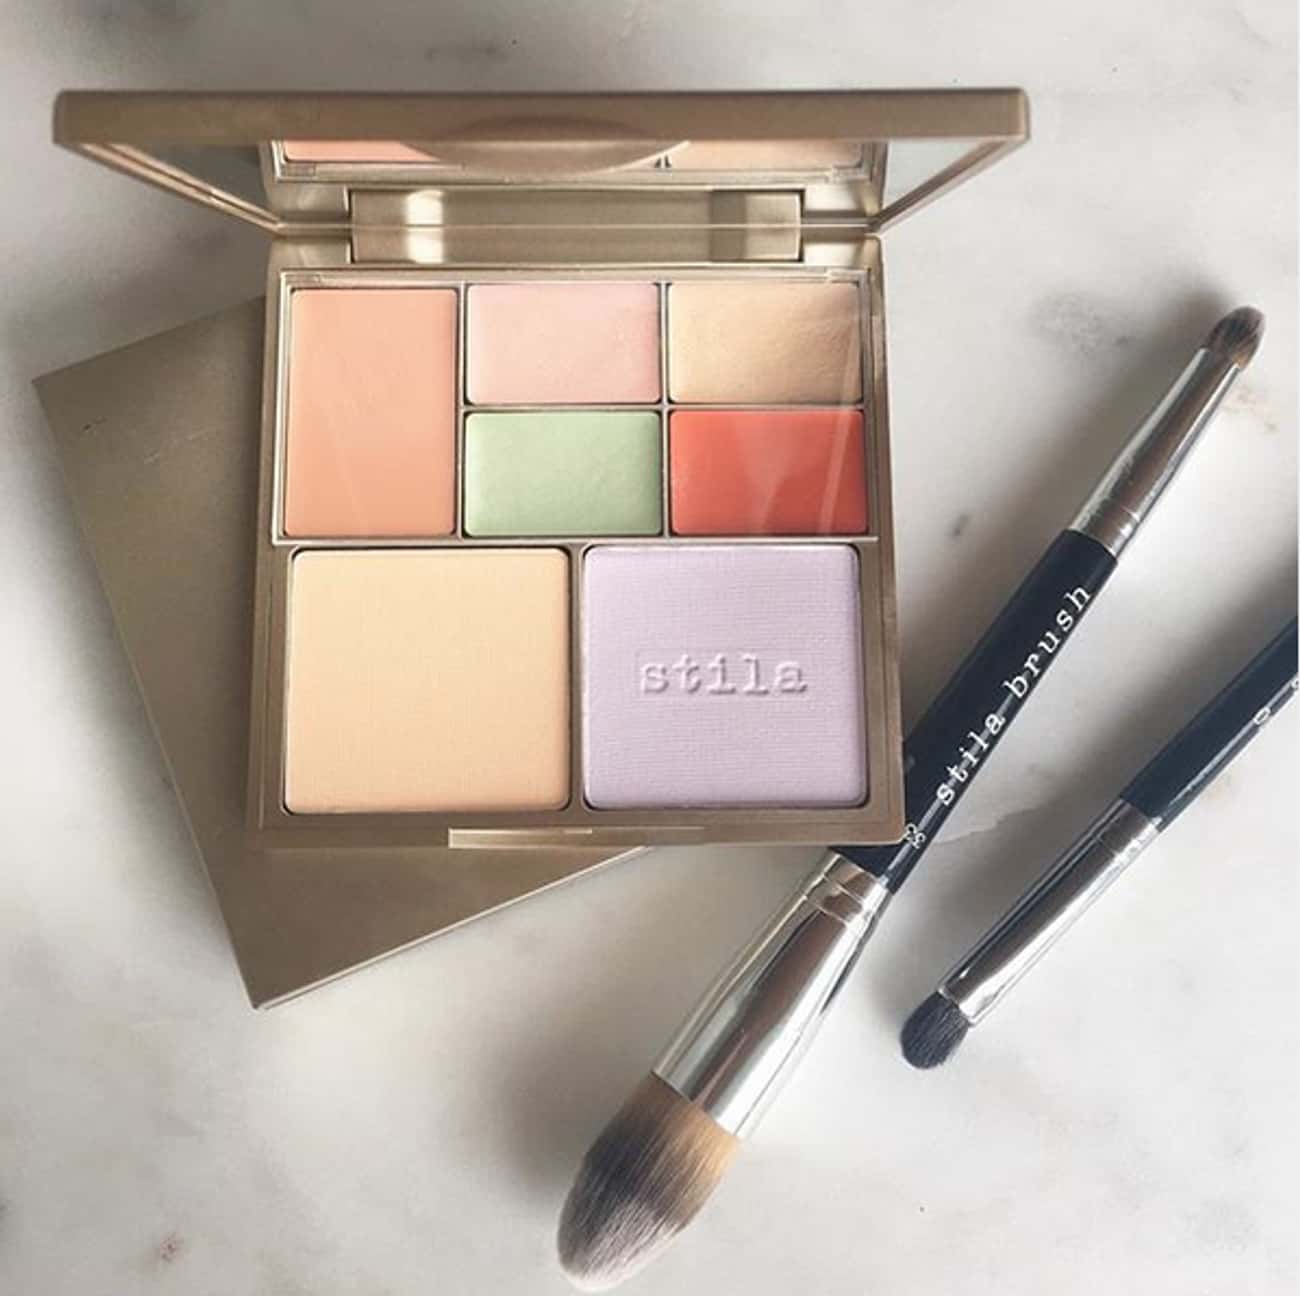 Combat complexion worries with the Correct & Perfect All-in-One Color Correcting Palette